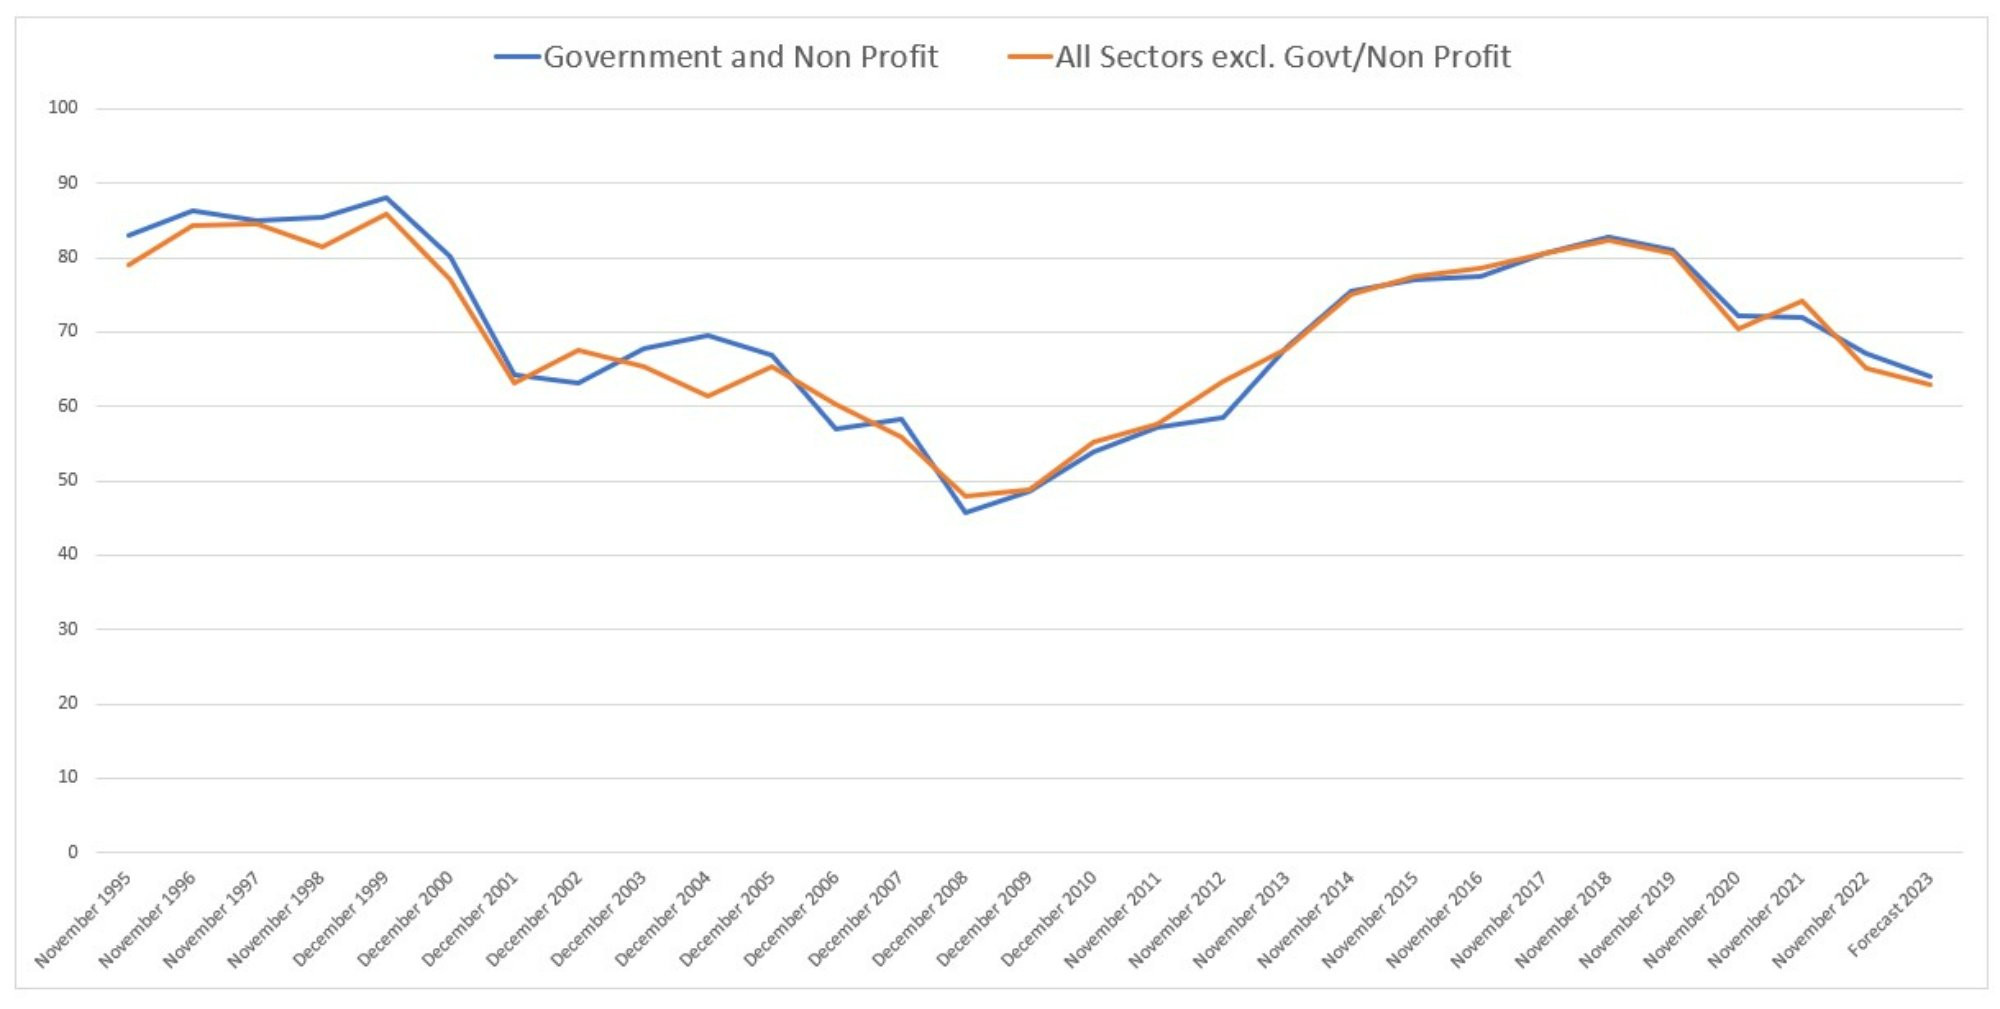 The private sector and government/non-profit sector's average Confidence Index responses for 2023